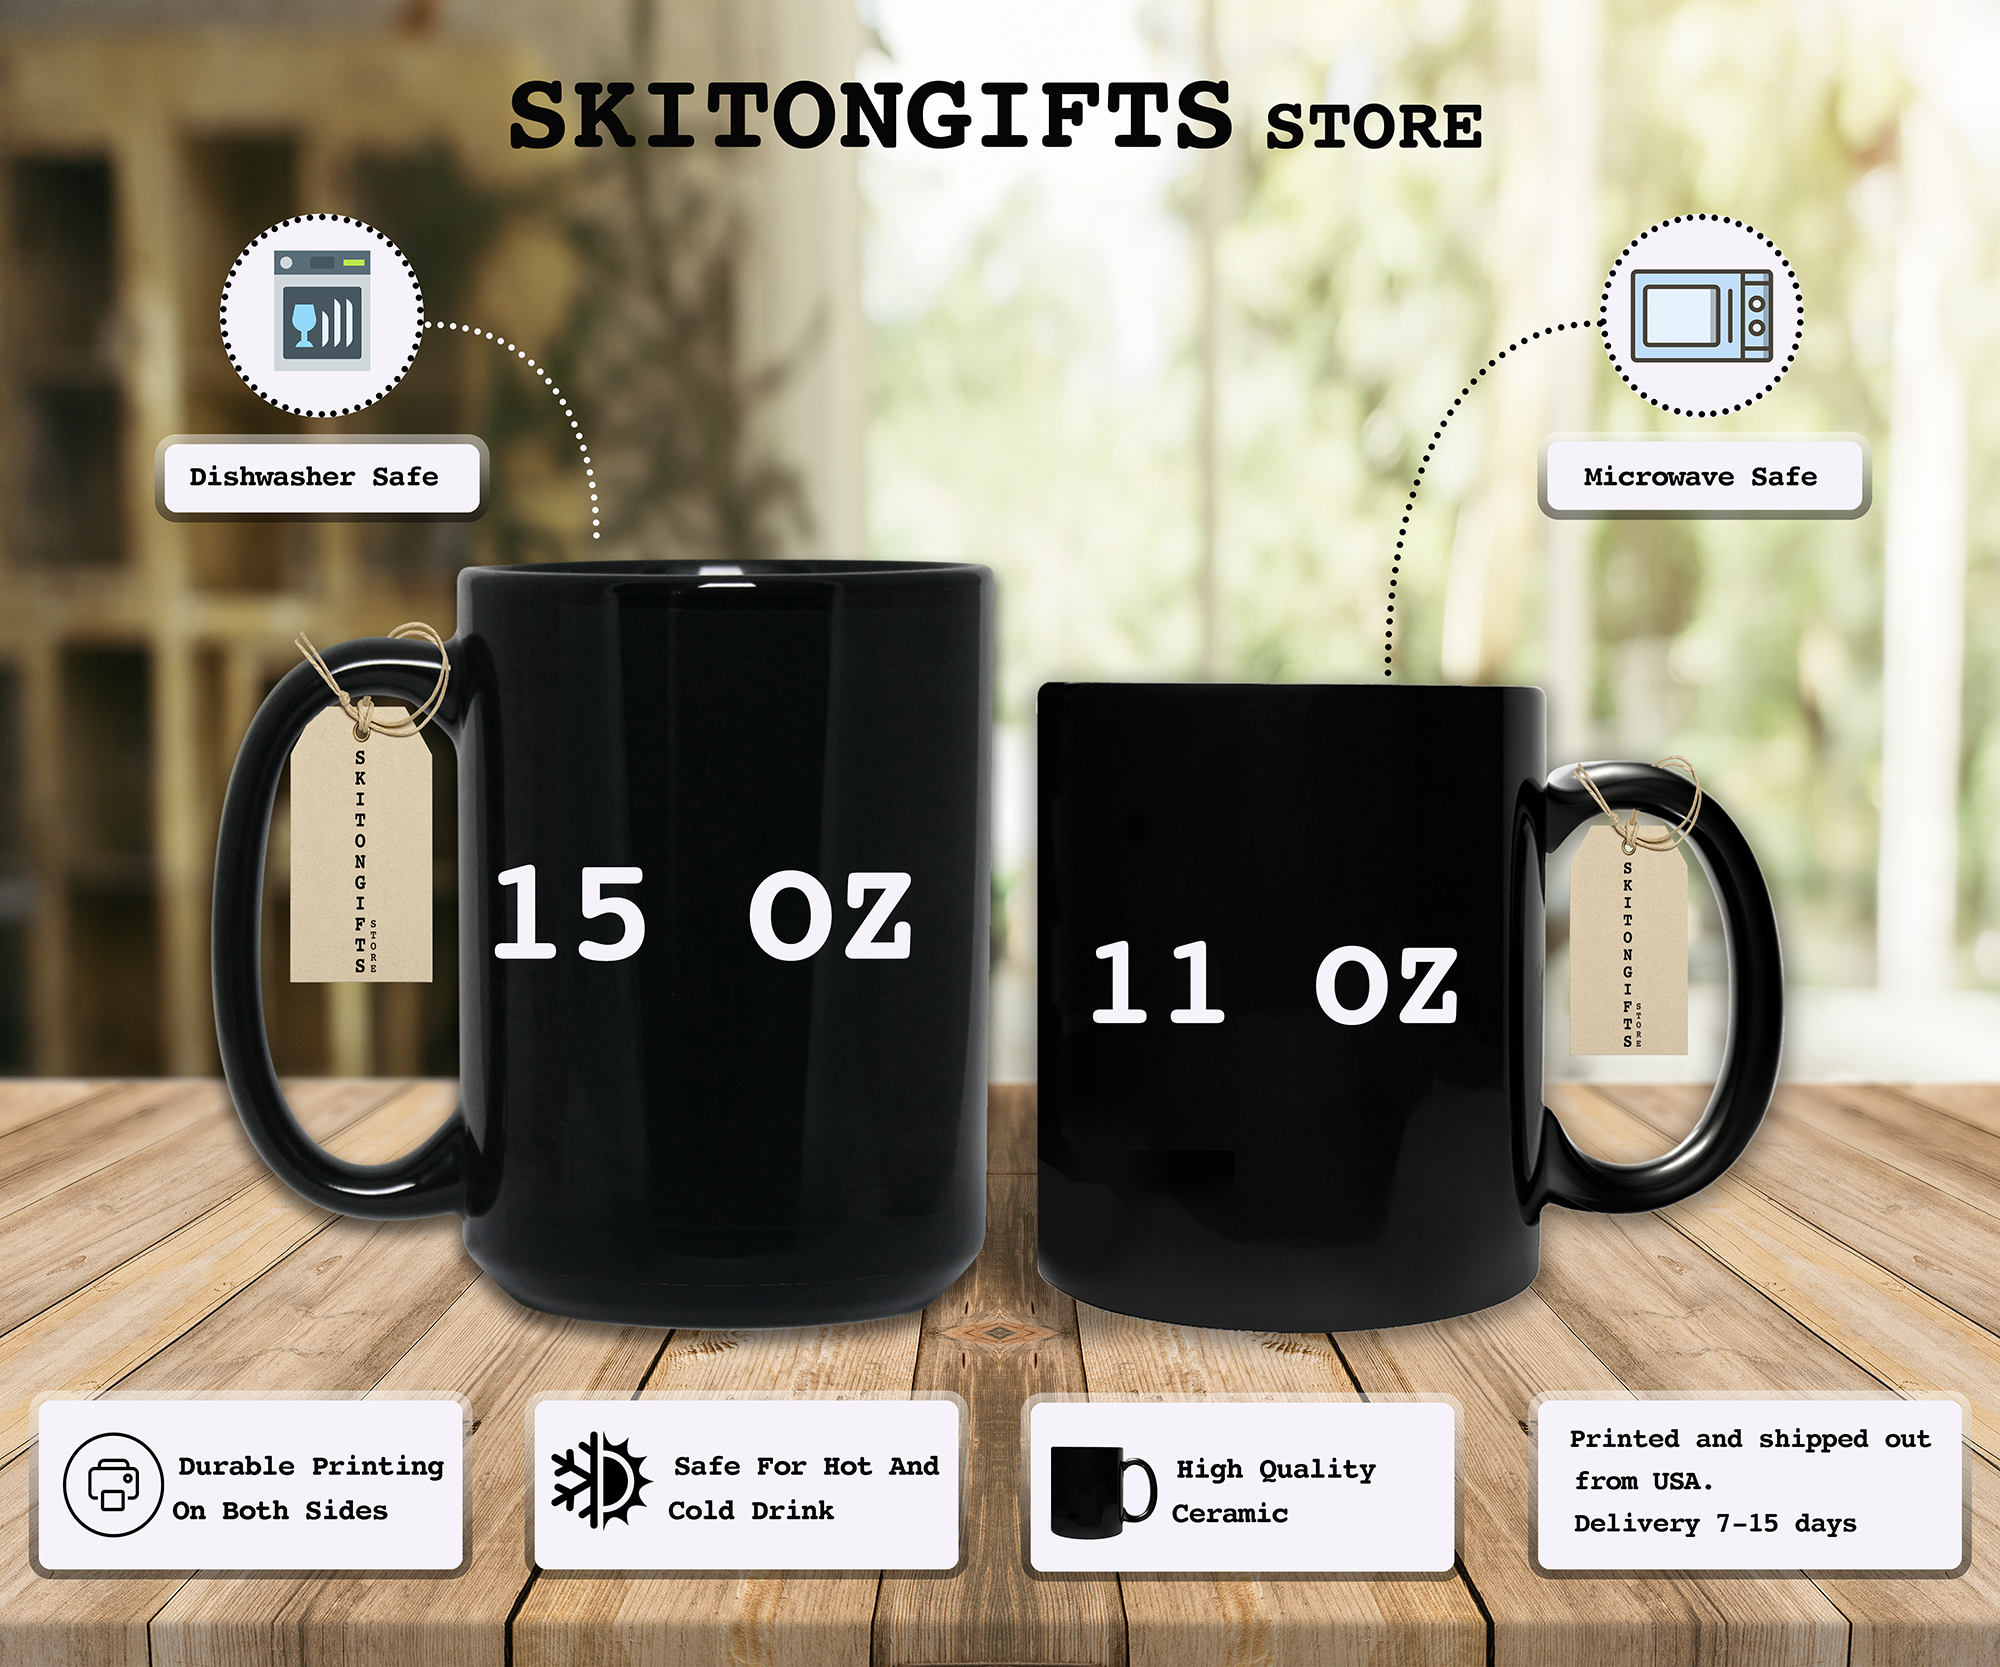 Skitongifts Funny Ceramic Novelty Coffee Mug After Custom Years You're Still The Best Son Keep That Shit Up P6k7ans